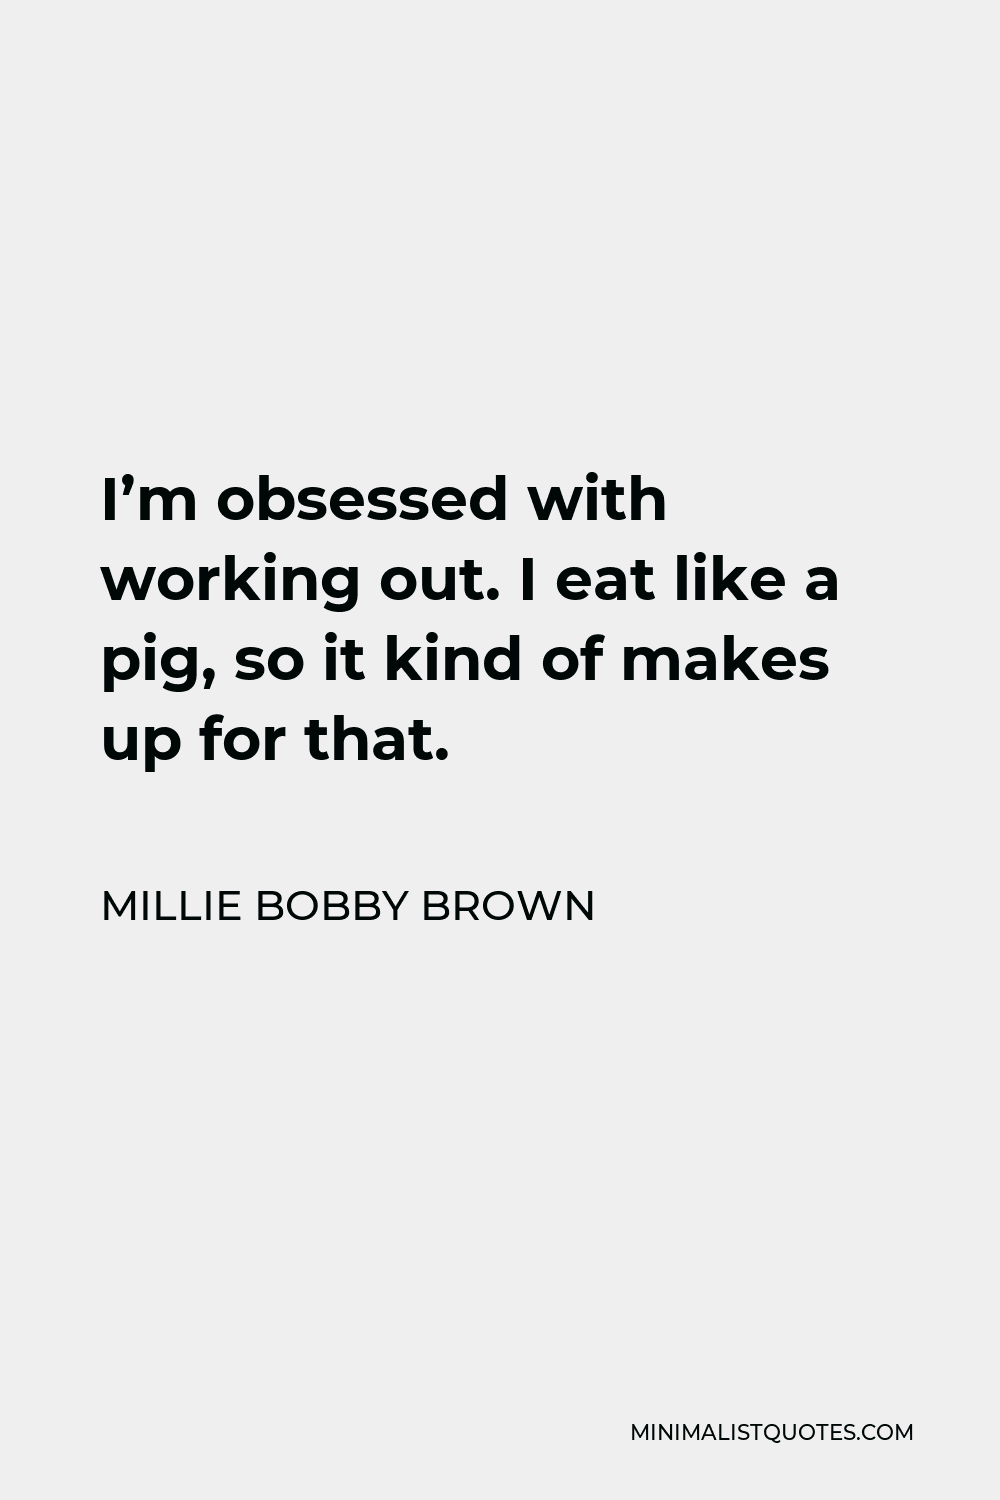 Millie Bobby Brown Quote - I’m obsessed with working out. I eat like a pig, so it kind of makes up for that.